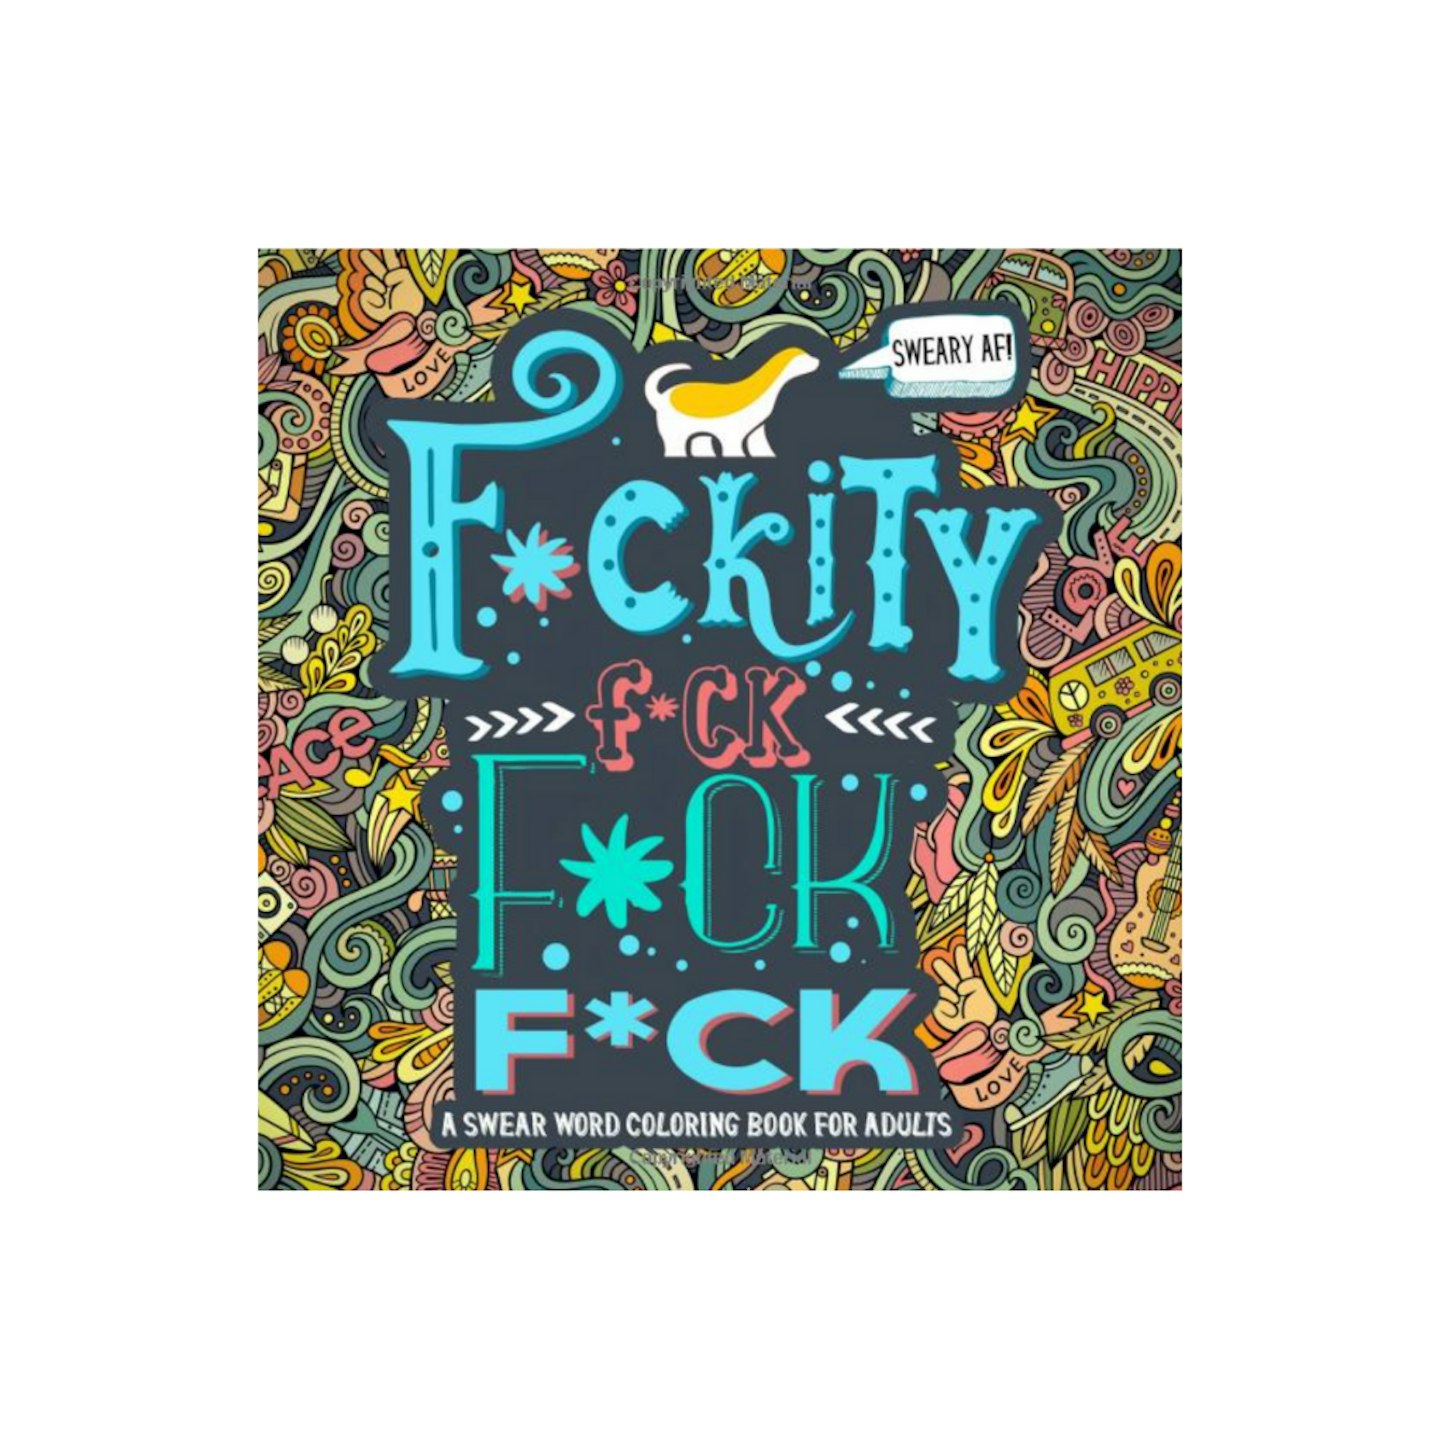 A Swear Word Coloring Book for Adults: Sweary AF: F-ckity F-ck F-ck F-ck